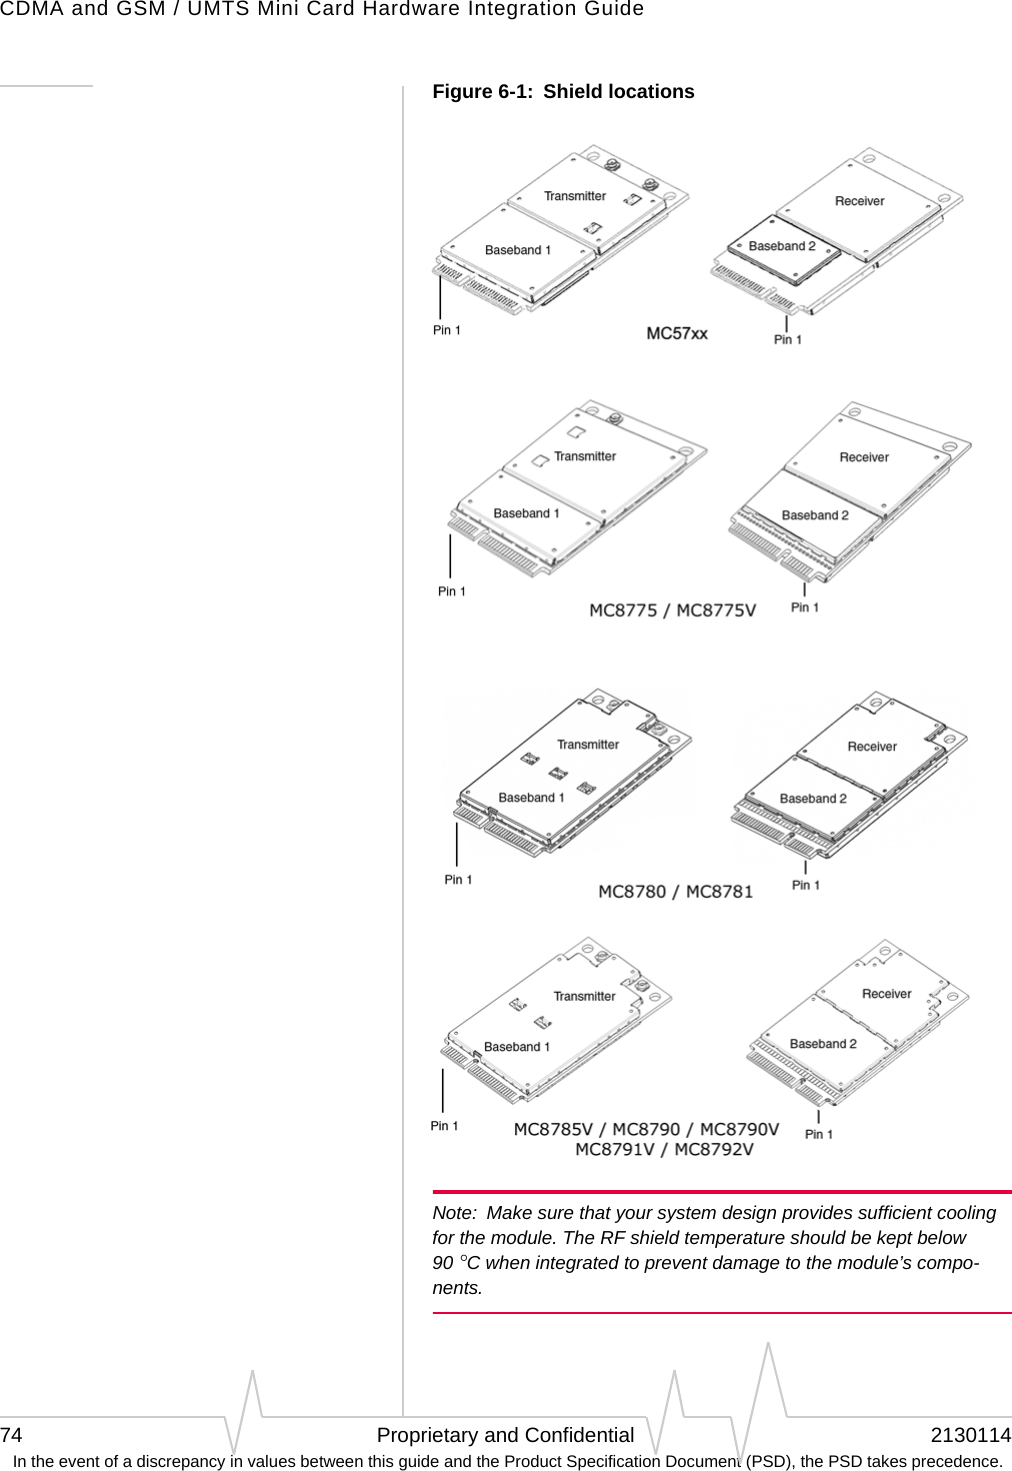 CDMA and GSM / UMTS Mini Card Hardware Integration Guide74 Proprietary and Confidential 2130114 In the event of a discrepancy in values between this guide and the Product Specification Document (PSD), the PSD takes precedence.Figure 6-1:  Shield locations Note: Make sure that your system design provides sufficient cooling for the module. The RF shield temperature should be kept below 90 °C when integrated to prevent damage to the module’s compo-nents.